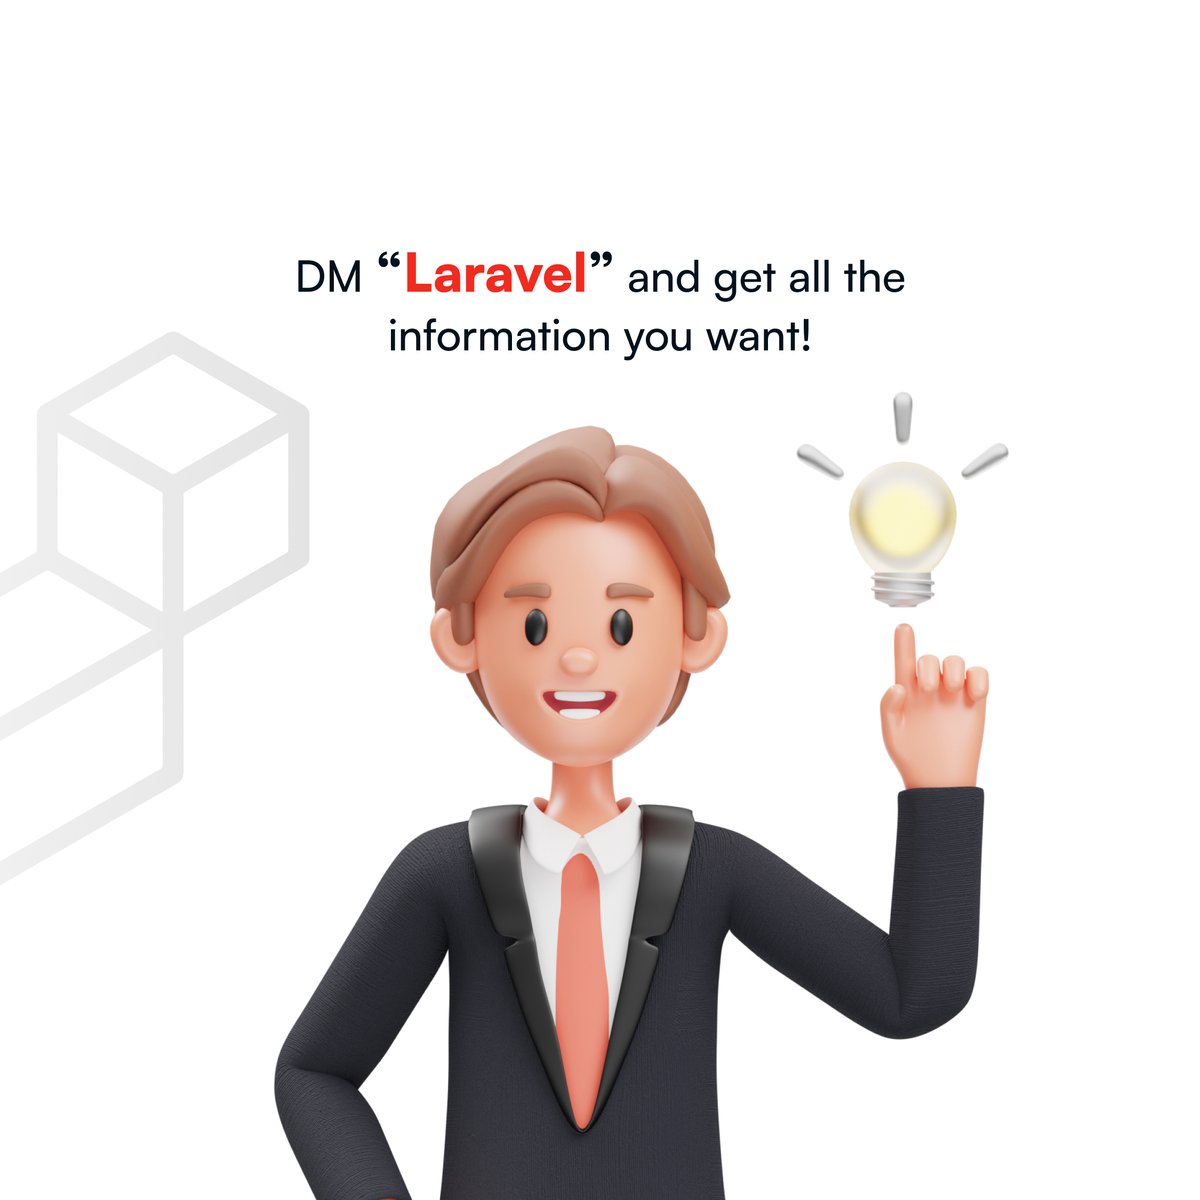 Ready to take your web development game to the next level?

Hire a dedicated Laravel Developer Today!

#laraveldeveloper #laradevelopers #phpframework #framework #HiringLaravelDeveloper #LaravelDevelopment #PHPDeveloper #HiringPHPDeveloper #WebDevelopment #Outsourcing #usa